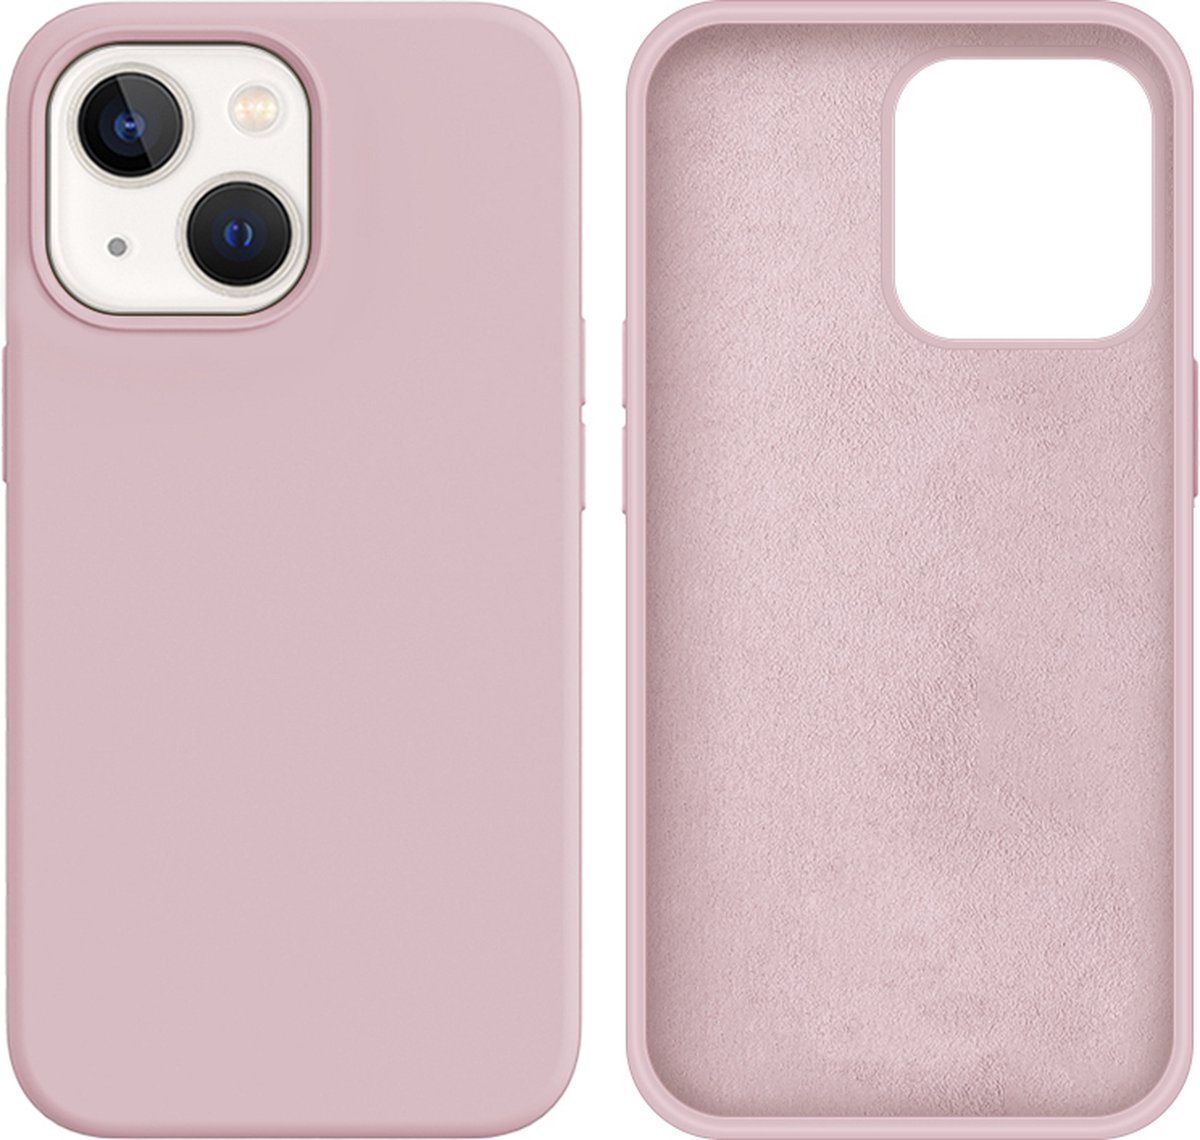 iPhone 12 | 12 Pro Silicone Licht Roze hoesje - 6,1 inch